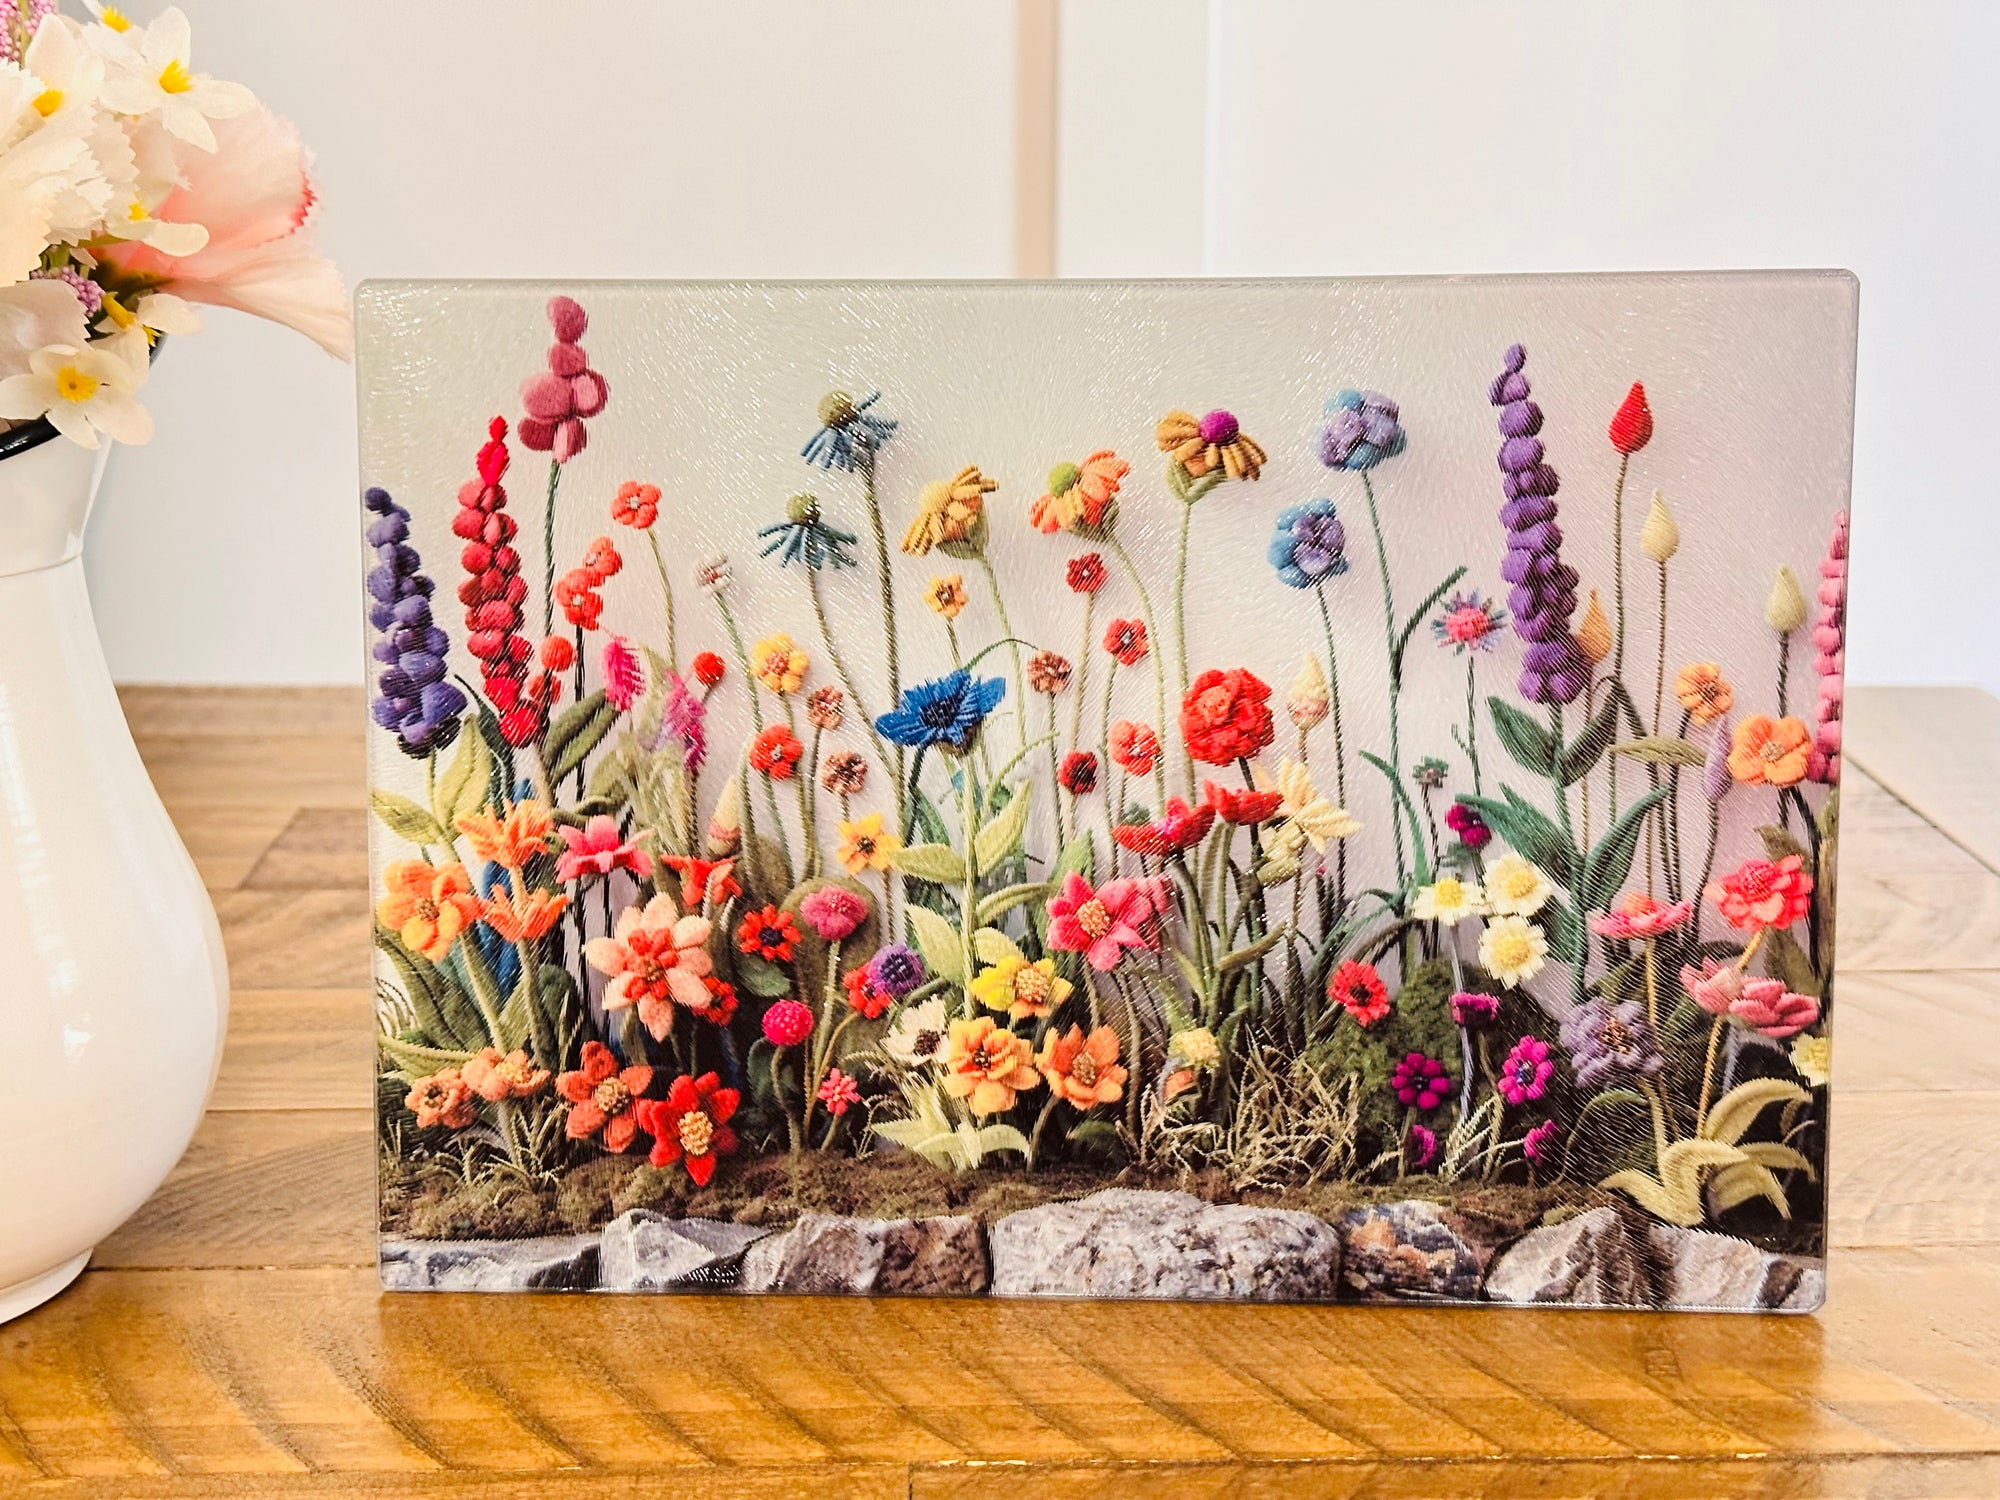 Personalized 8" x 11" Textured & Tempered Glass Cutting Board Wildflowers #620